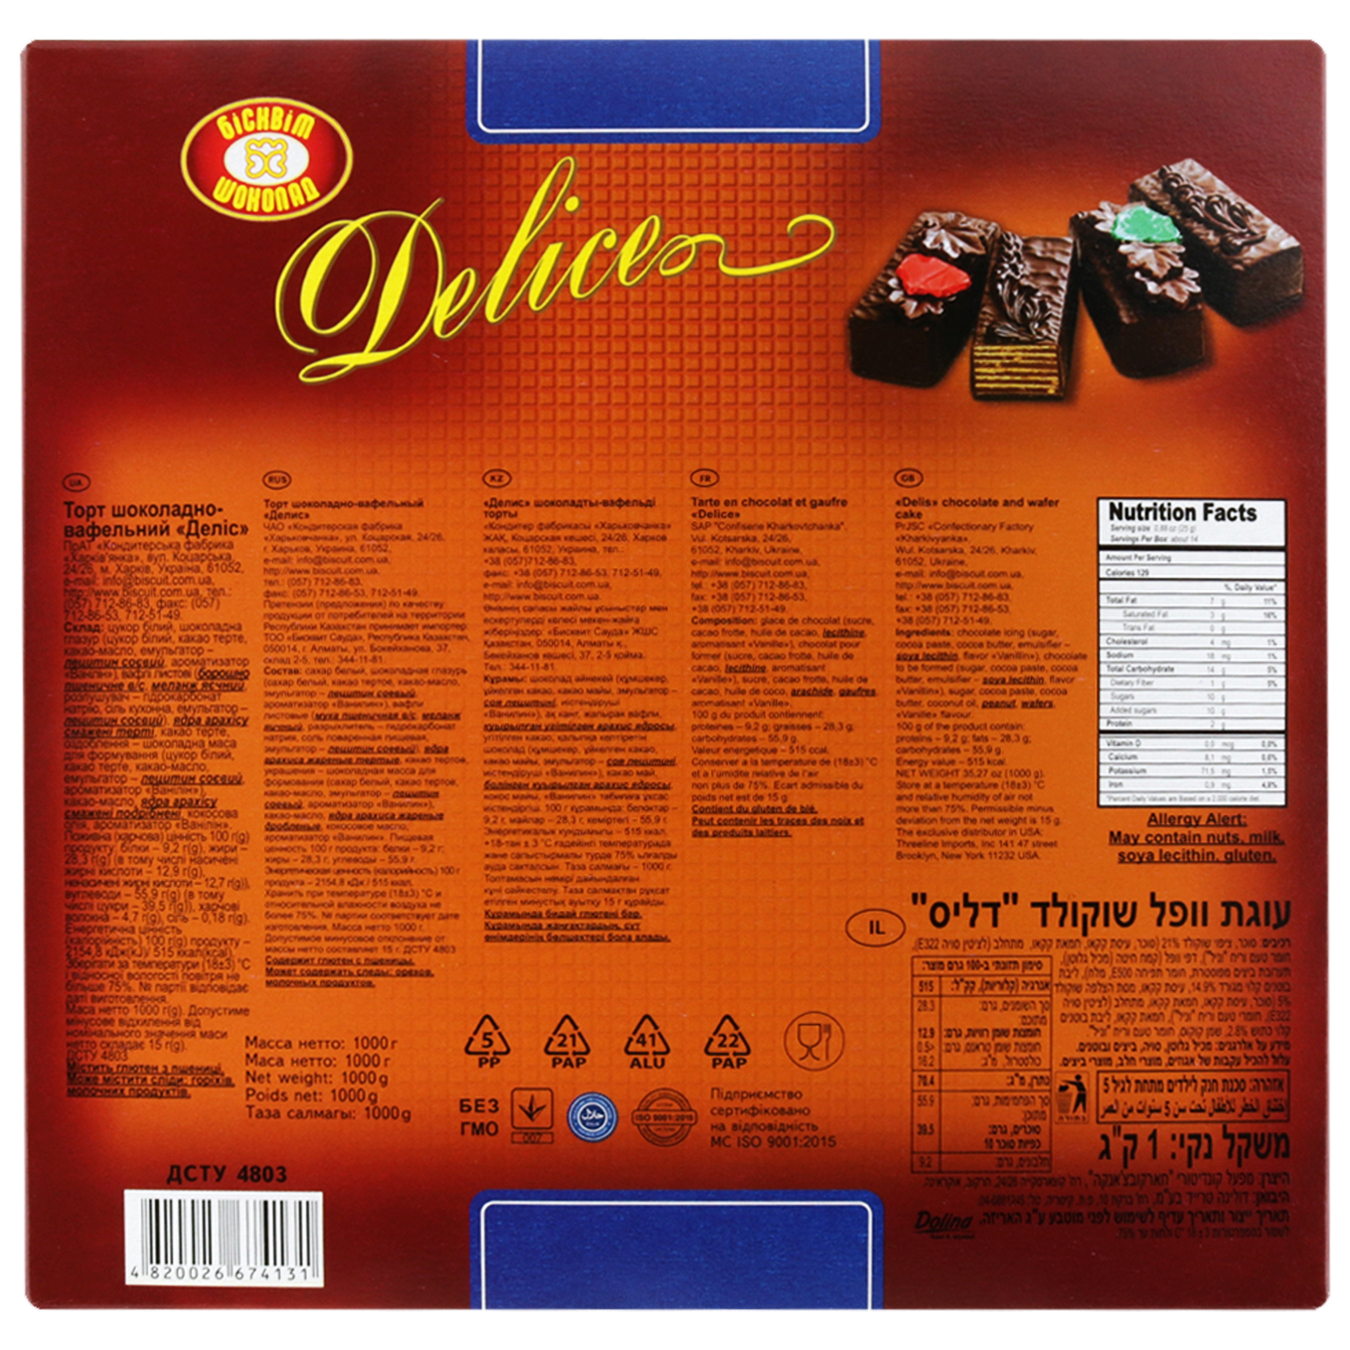 Biscuit-Chocolate Delice Chocolate-Wafer Cake 1kg 2